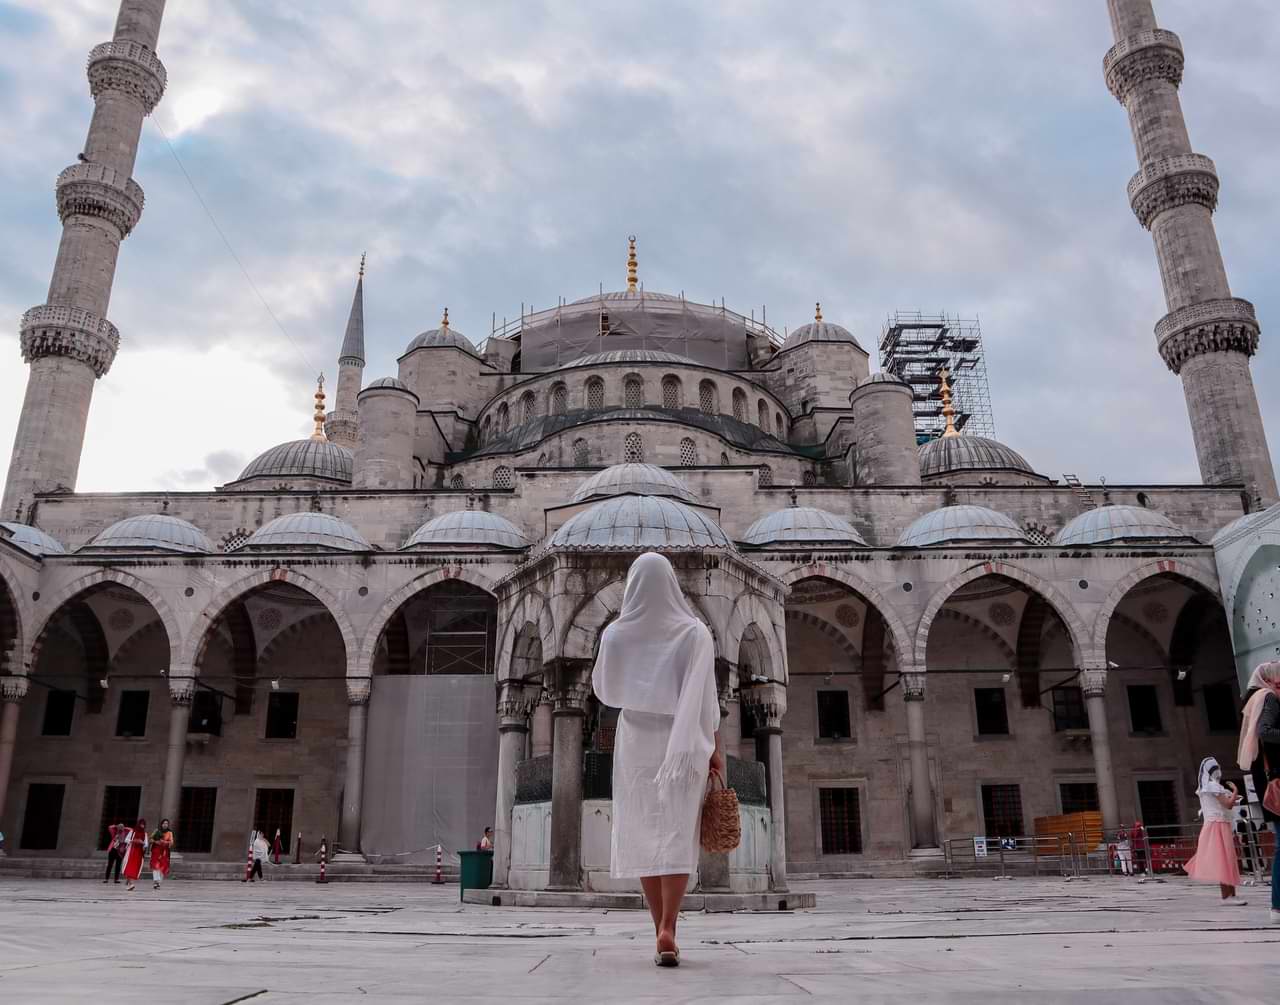 How To Visit Blue Mosque Full Guide Guided Istanbul Tours